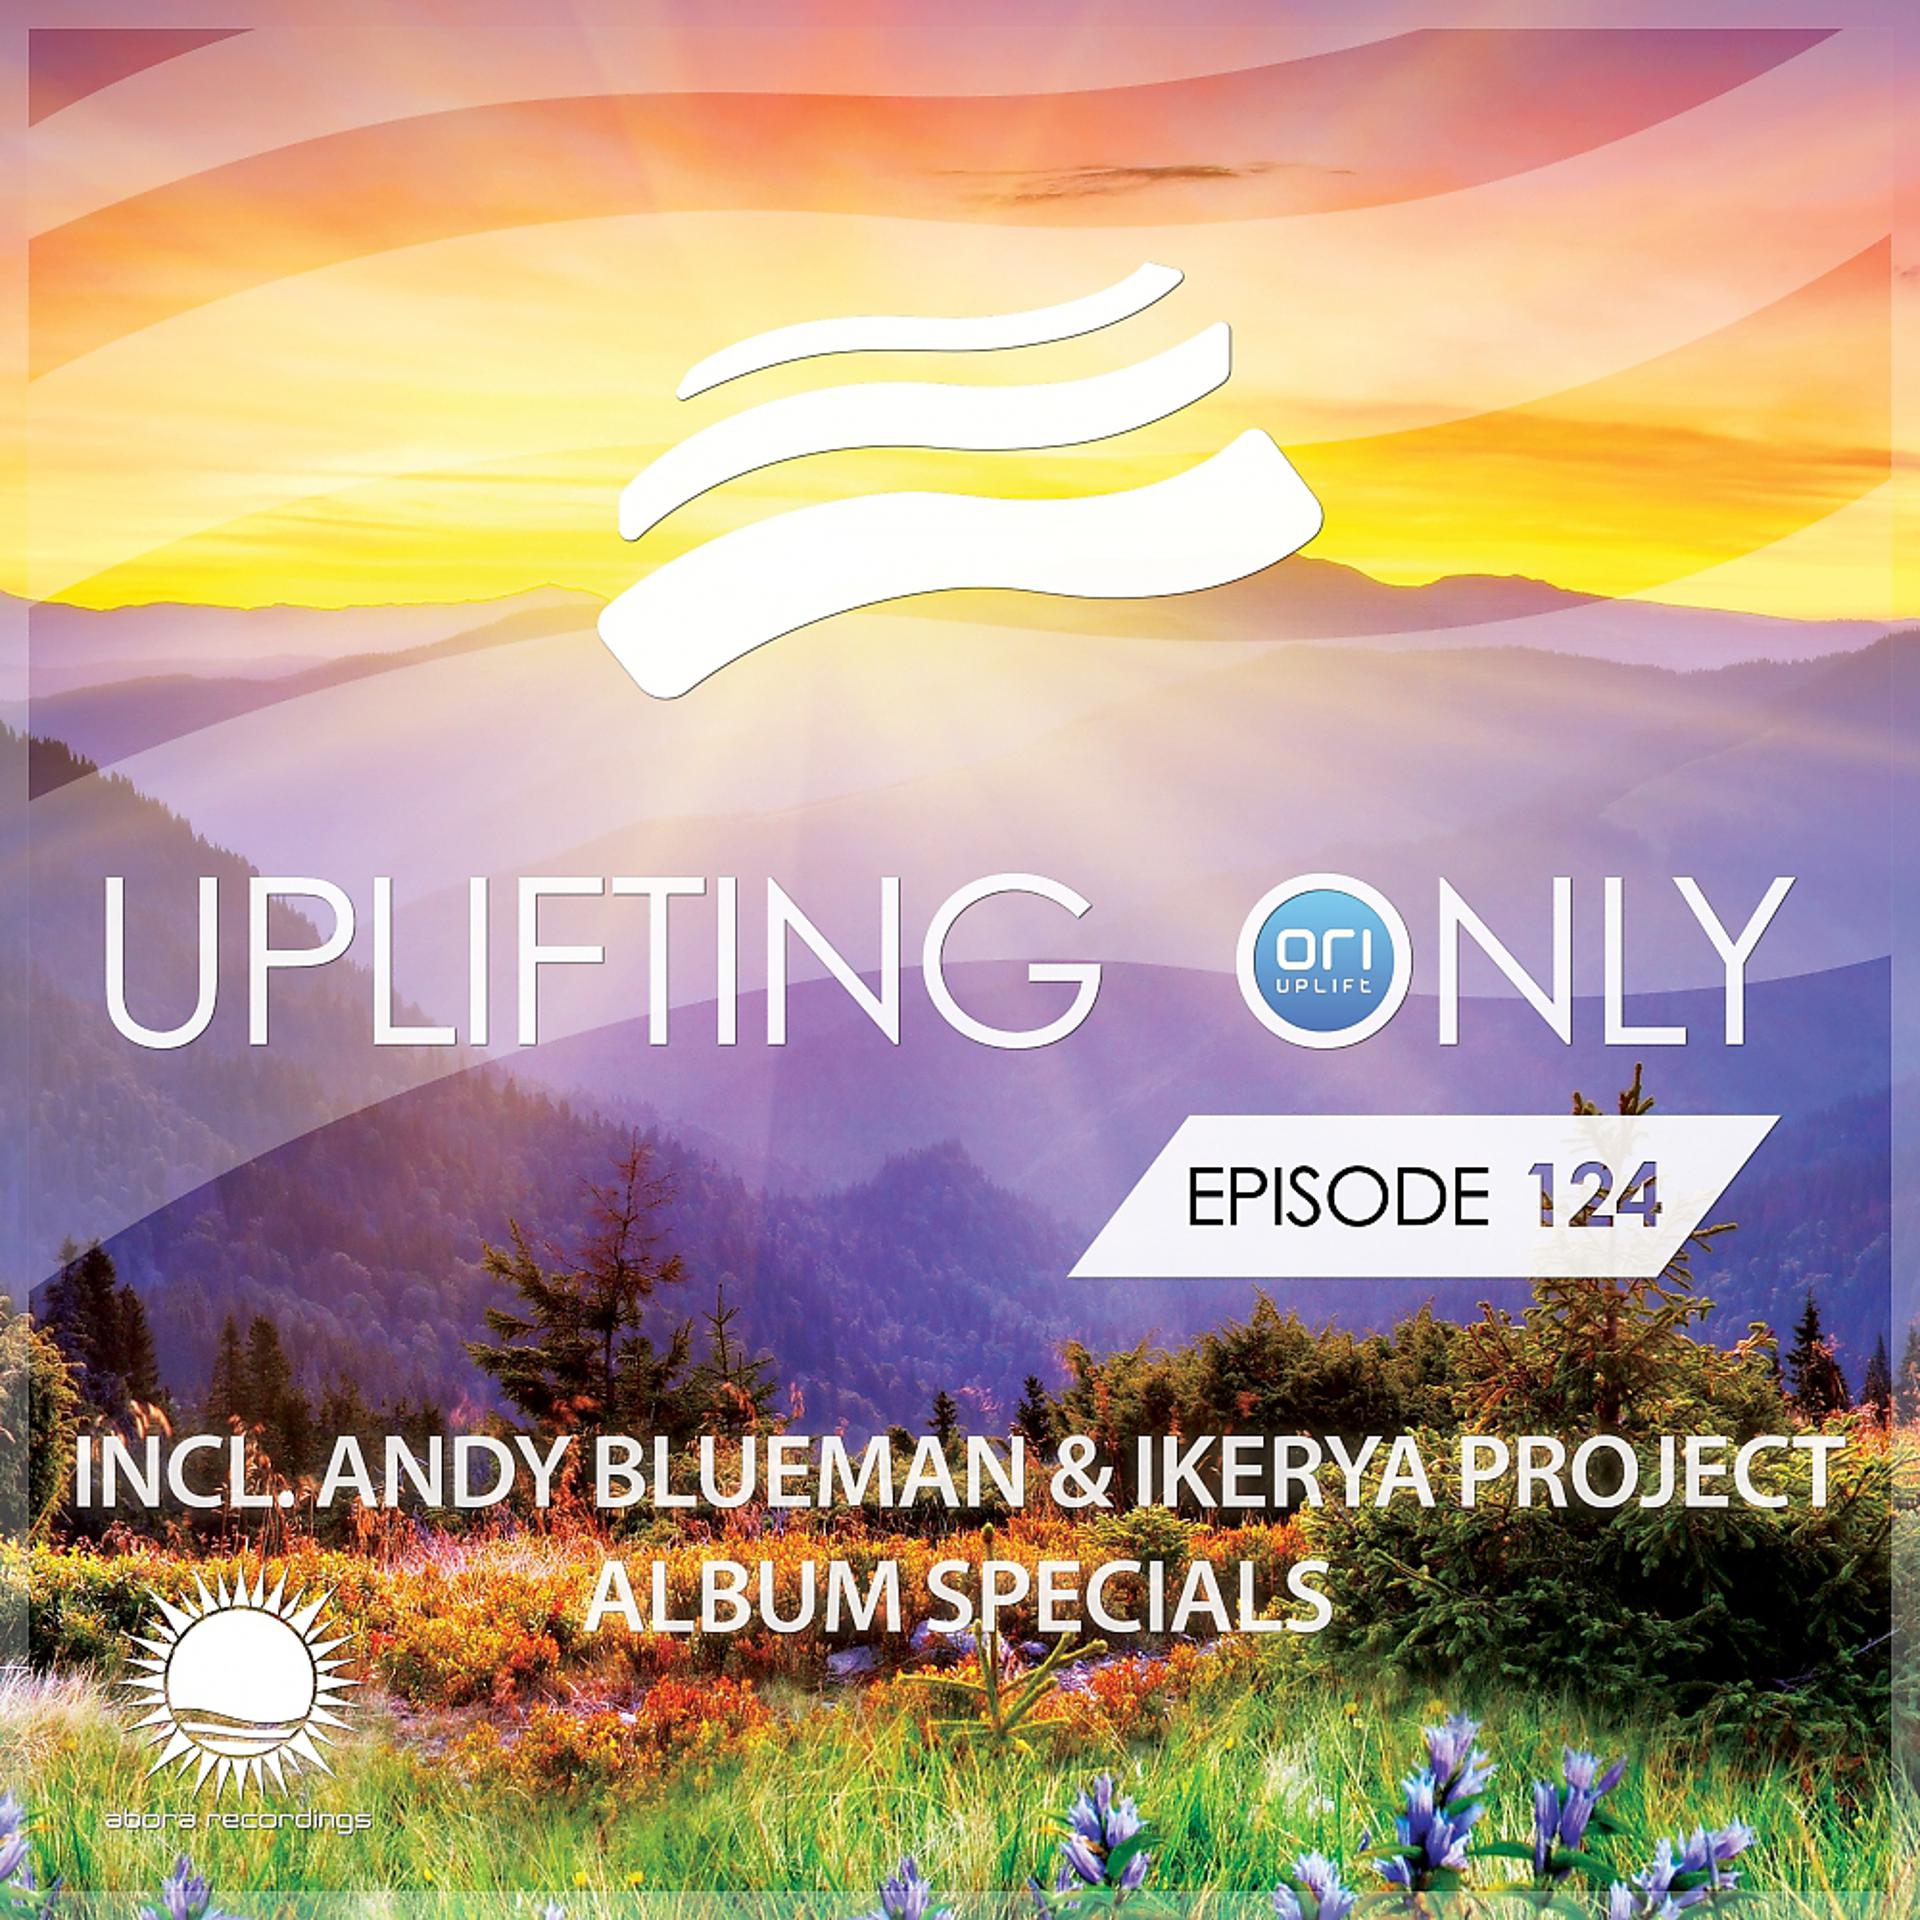 Постер альбома Uplifting Only Episode 124 (incl. Andy Blueman & Ikerya Project Album Specials)